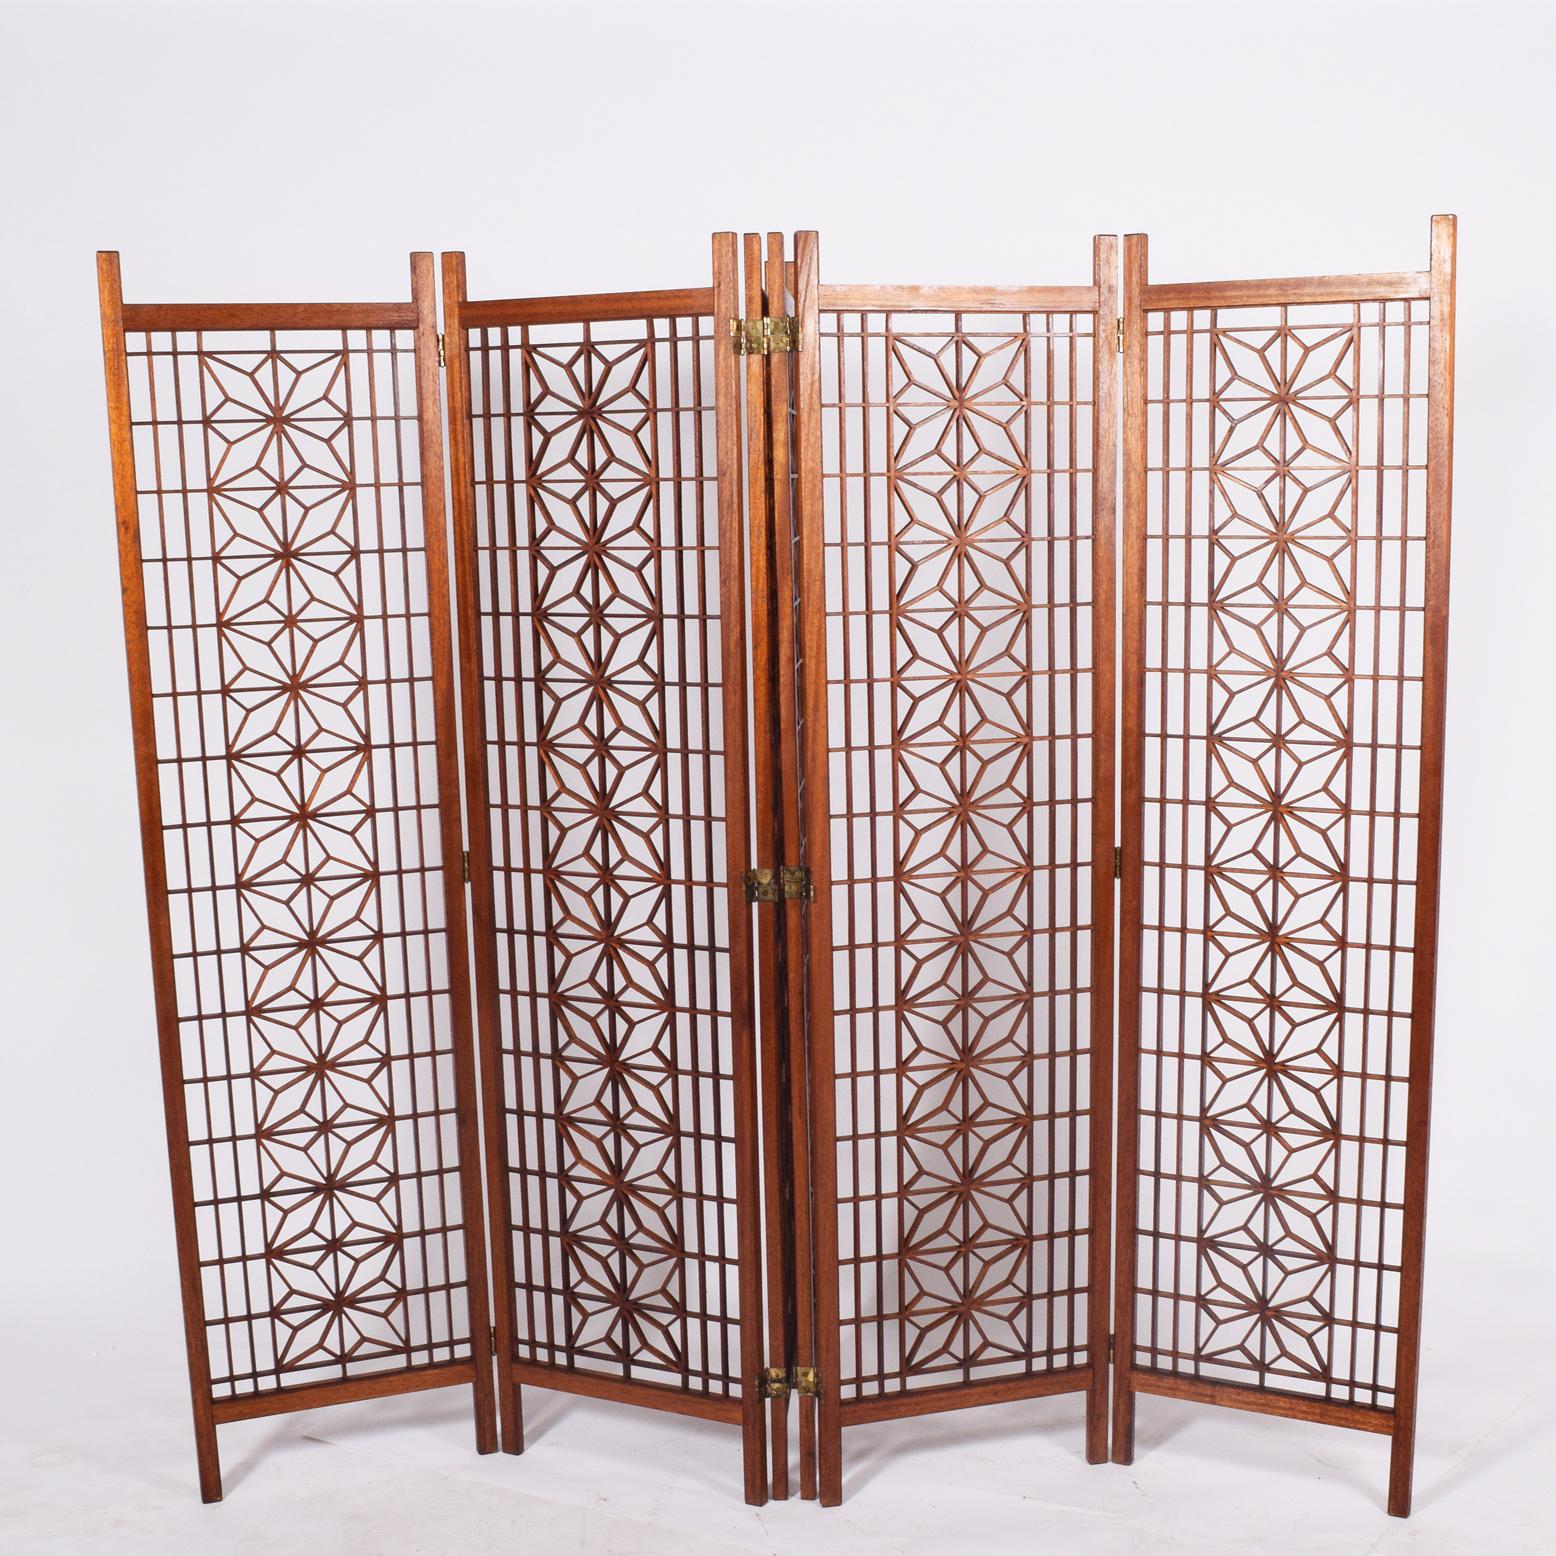 Six-panel screen or room divider made of solid teak with geometric designs.

Measures: Each panel: 75